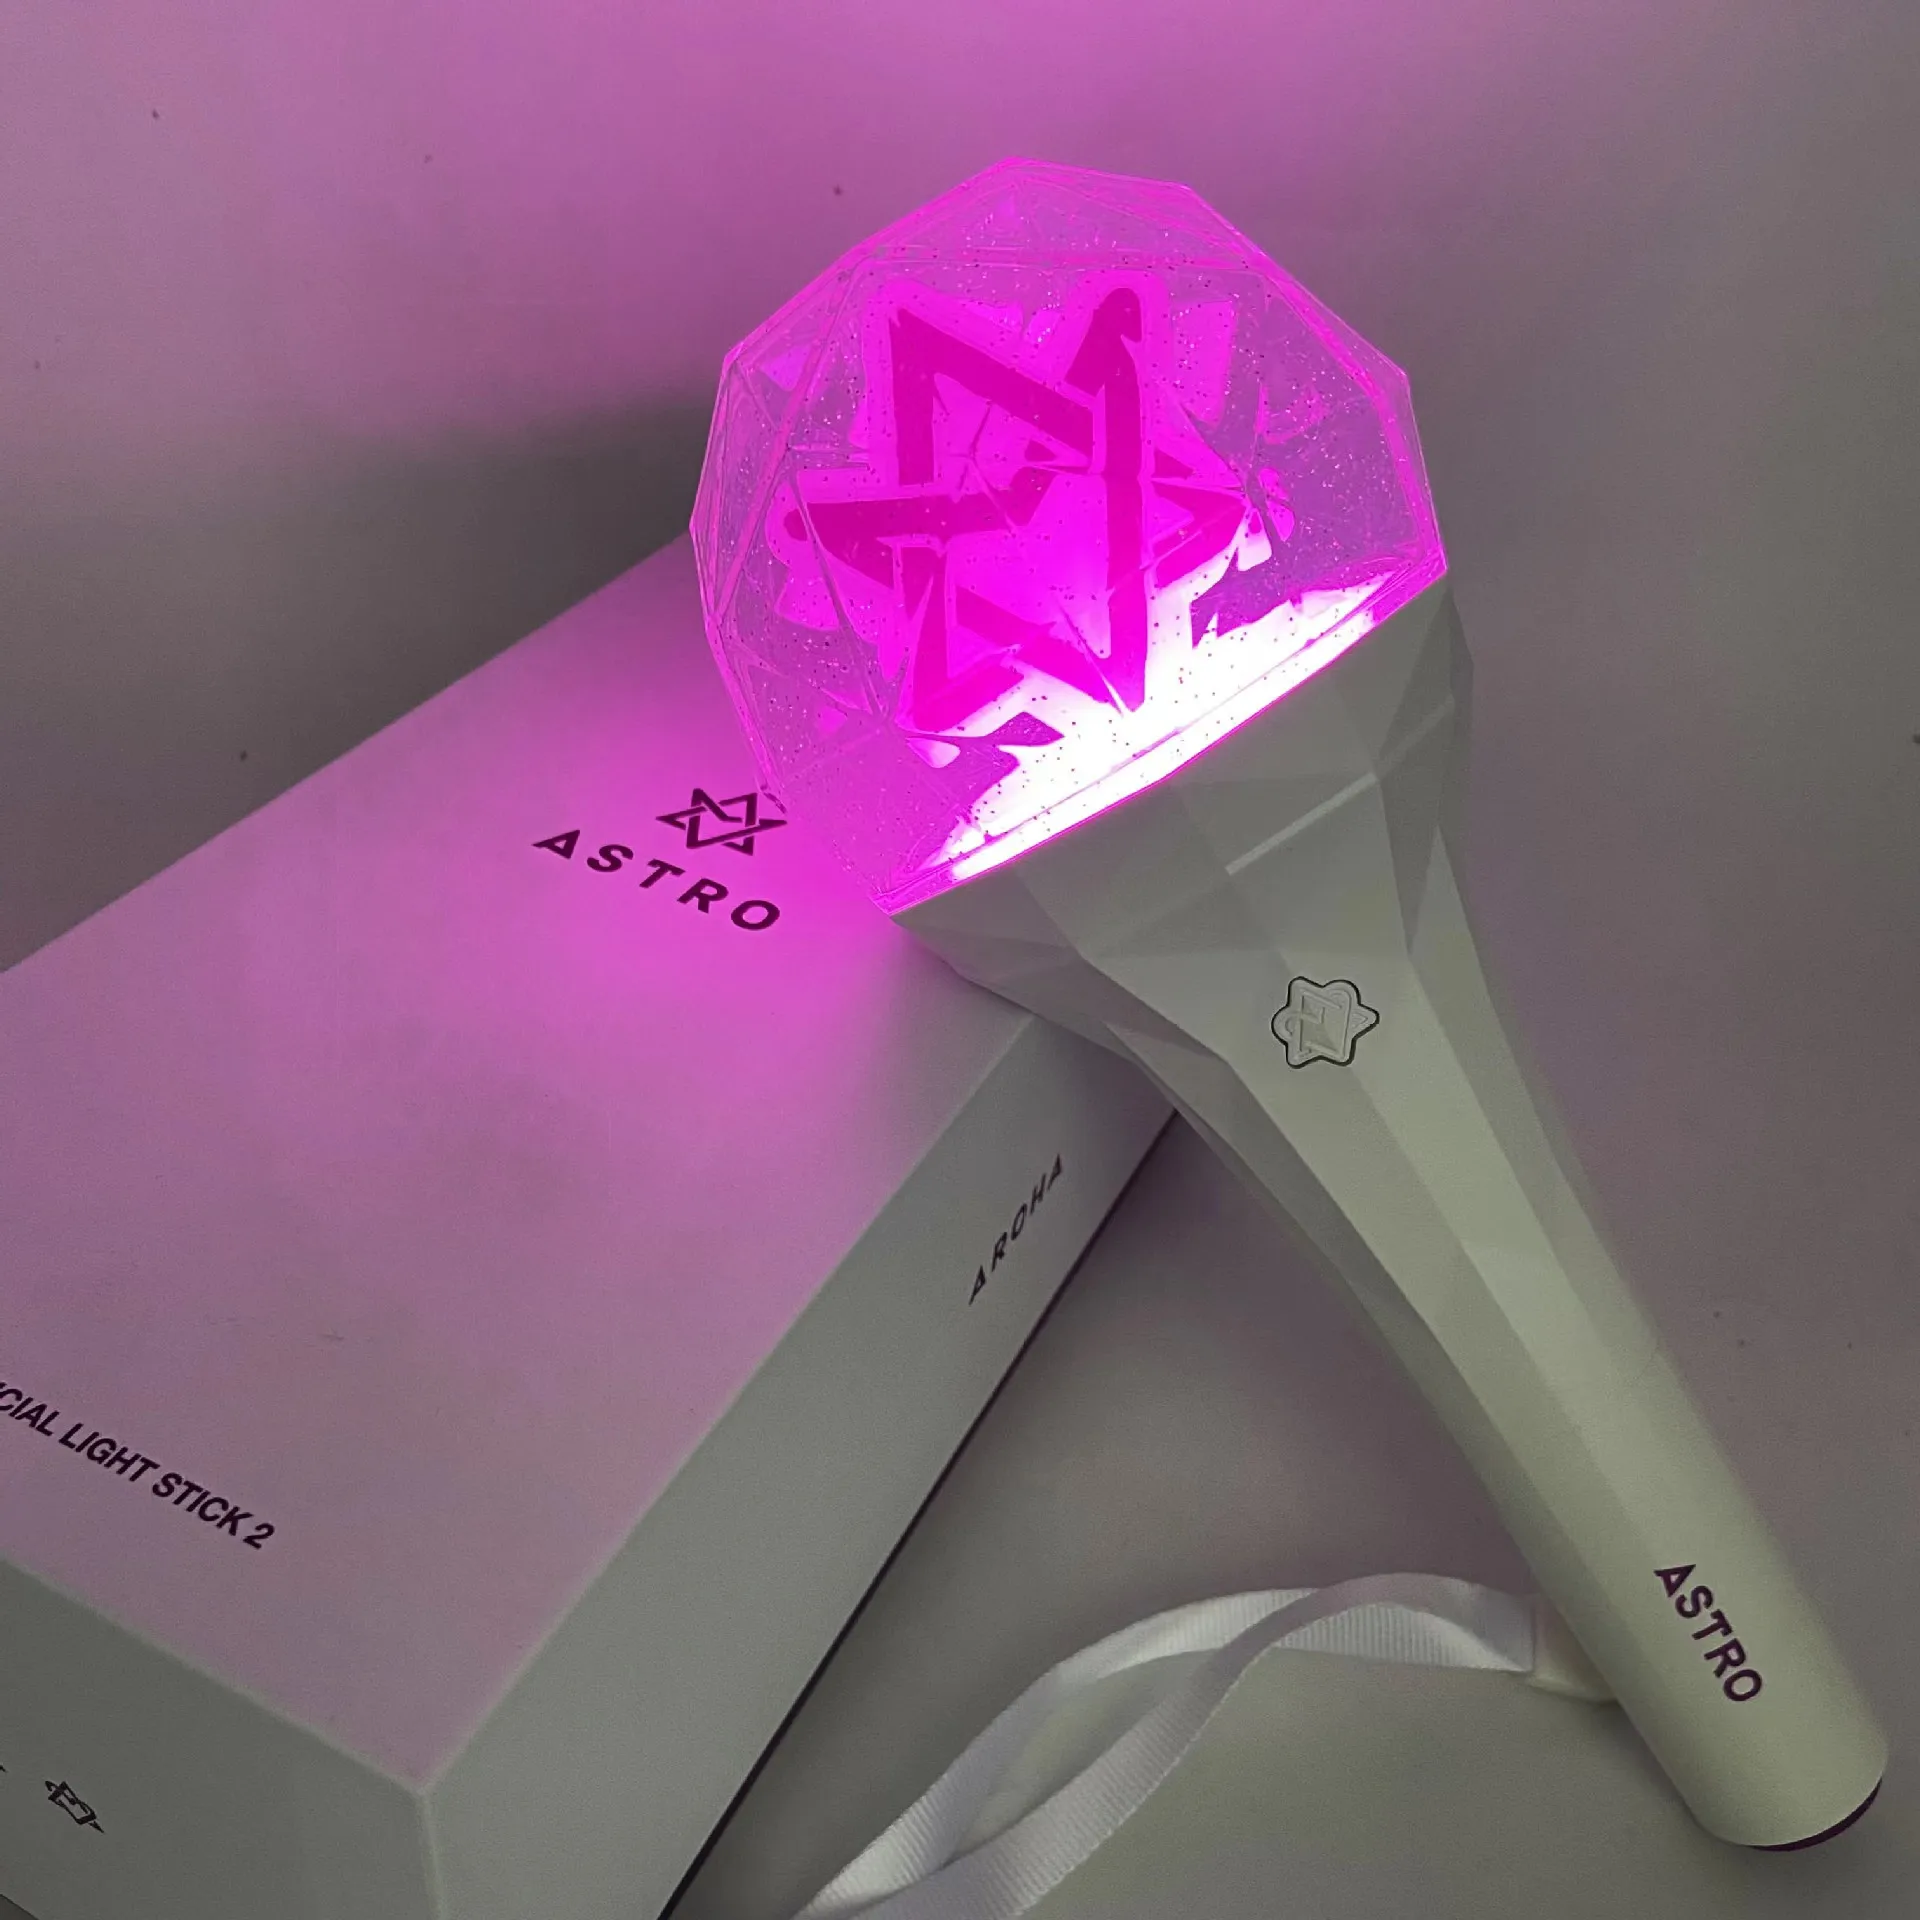 kpop-astro-lightstick-ver2-second-generation-astro-concert-hand-lamp-glow-light-stick-flash-lamp-fans-collection-fans-gift